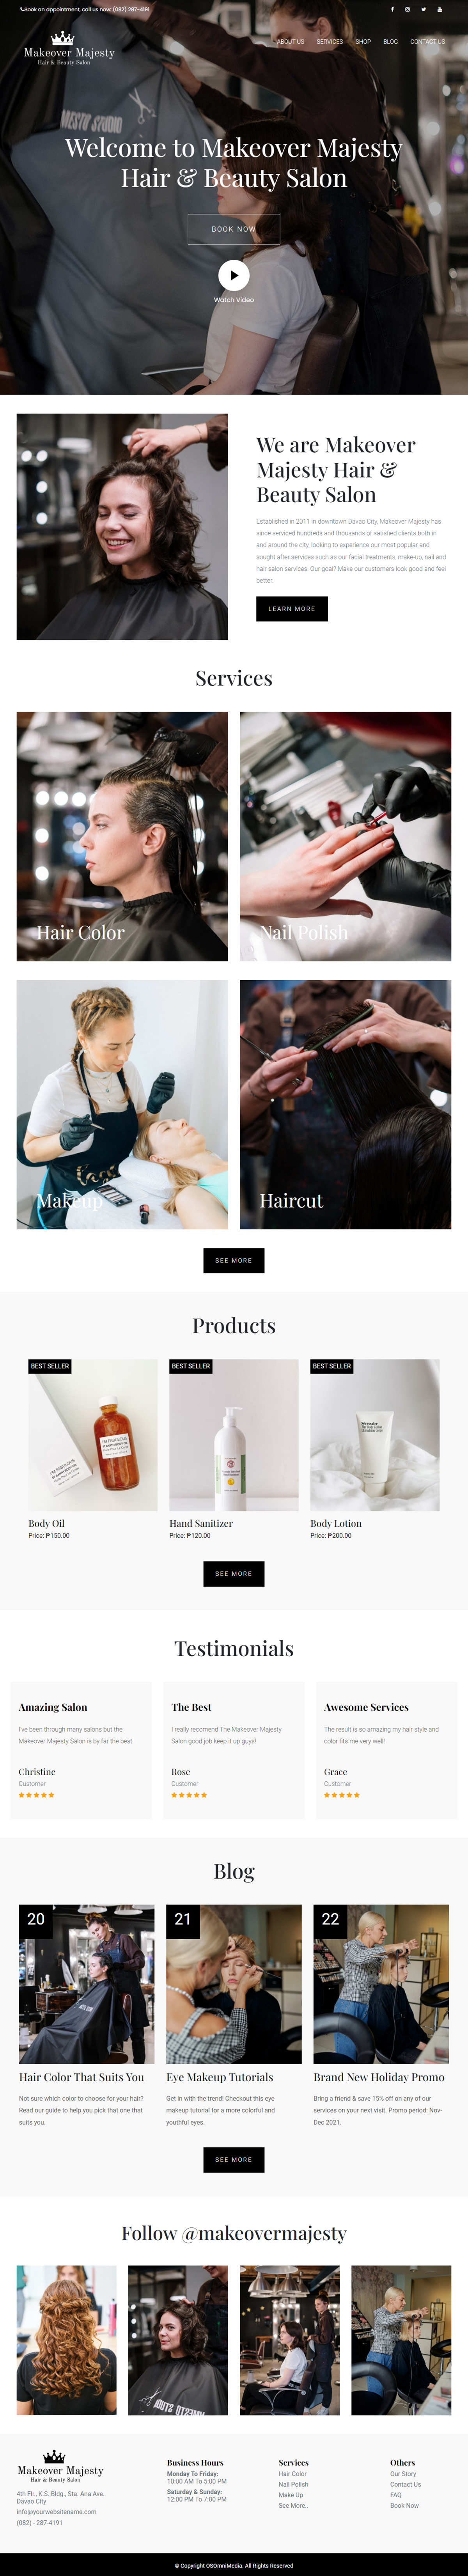 Makeover Majesty Hair & Beauty Salon Website for Your Business from  OSOmnimedia Davao